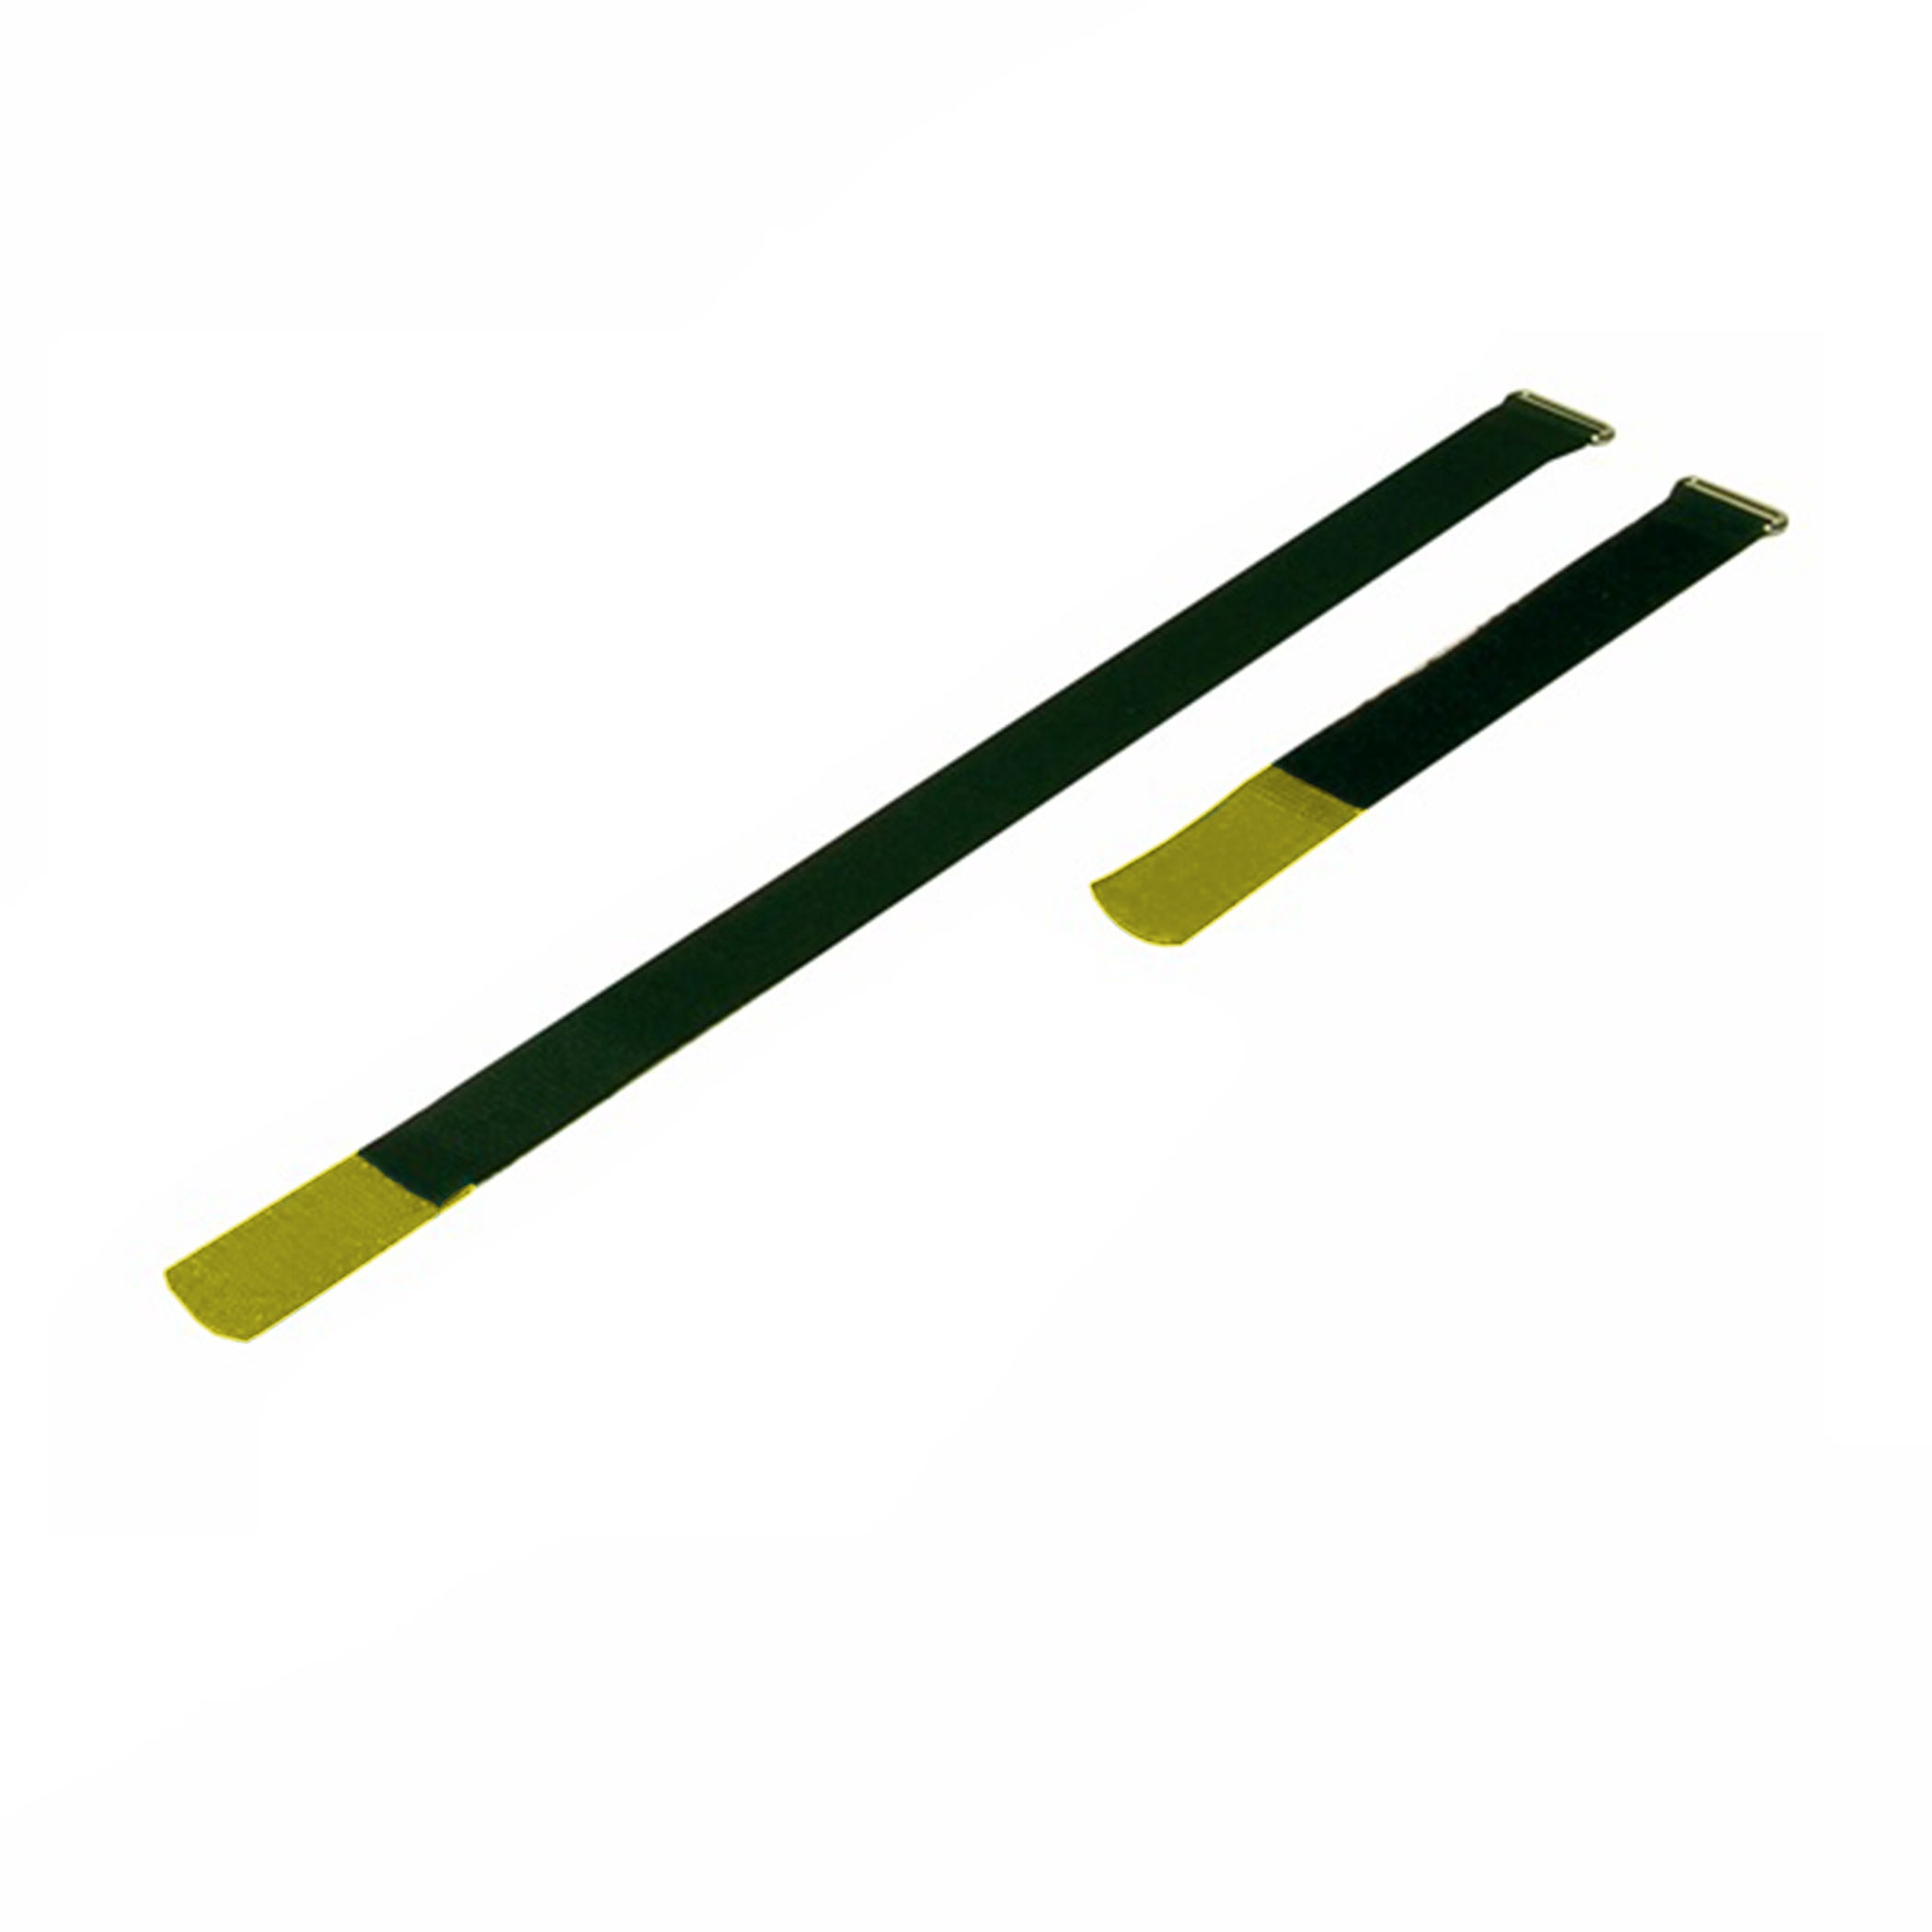 Cable Tie 300x25mm with Hook Yellow, (10 pieces) - a2530-700h